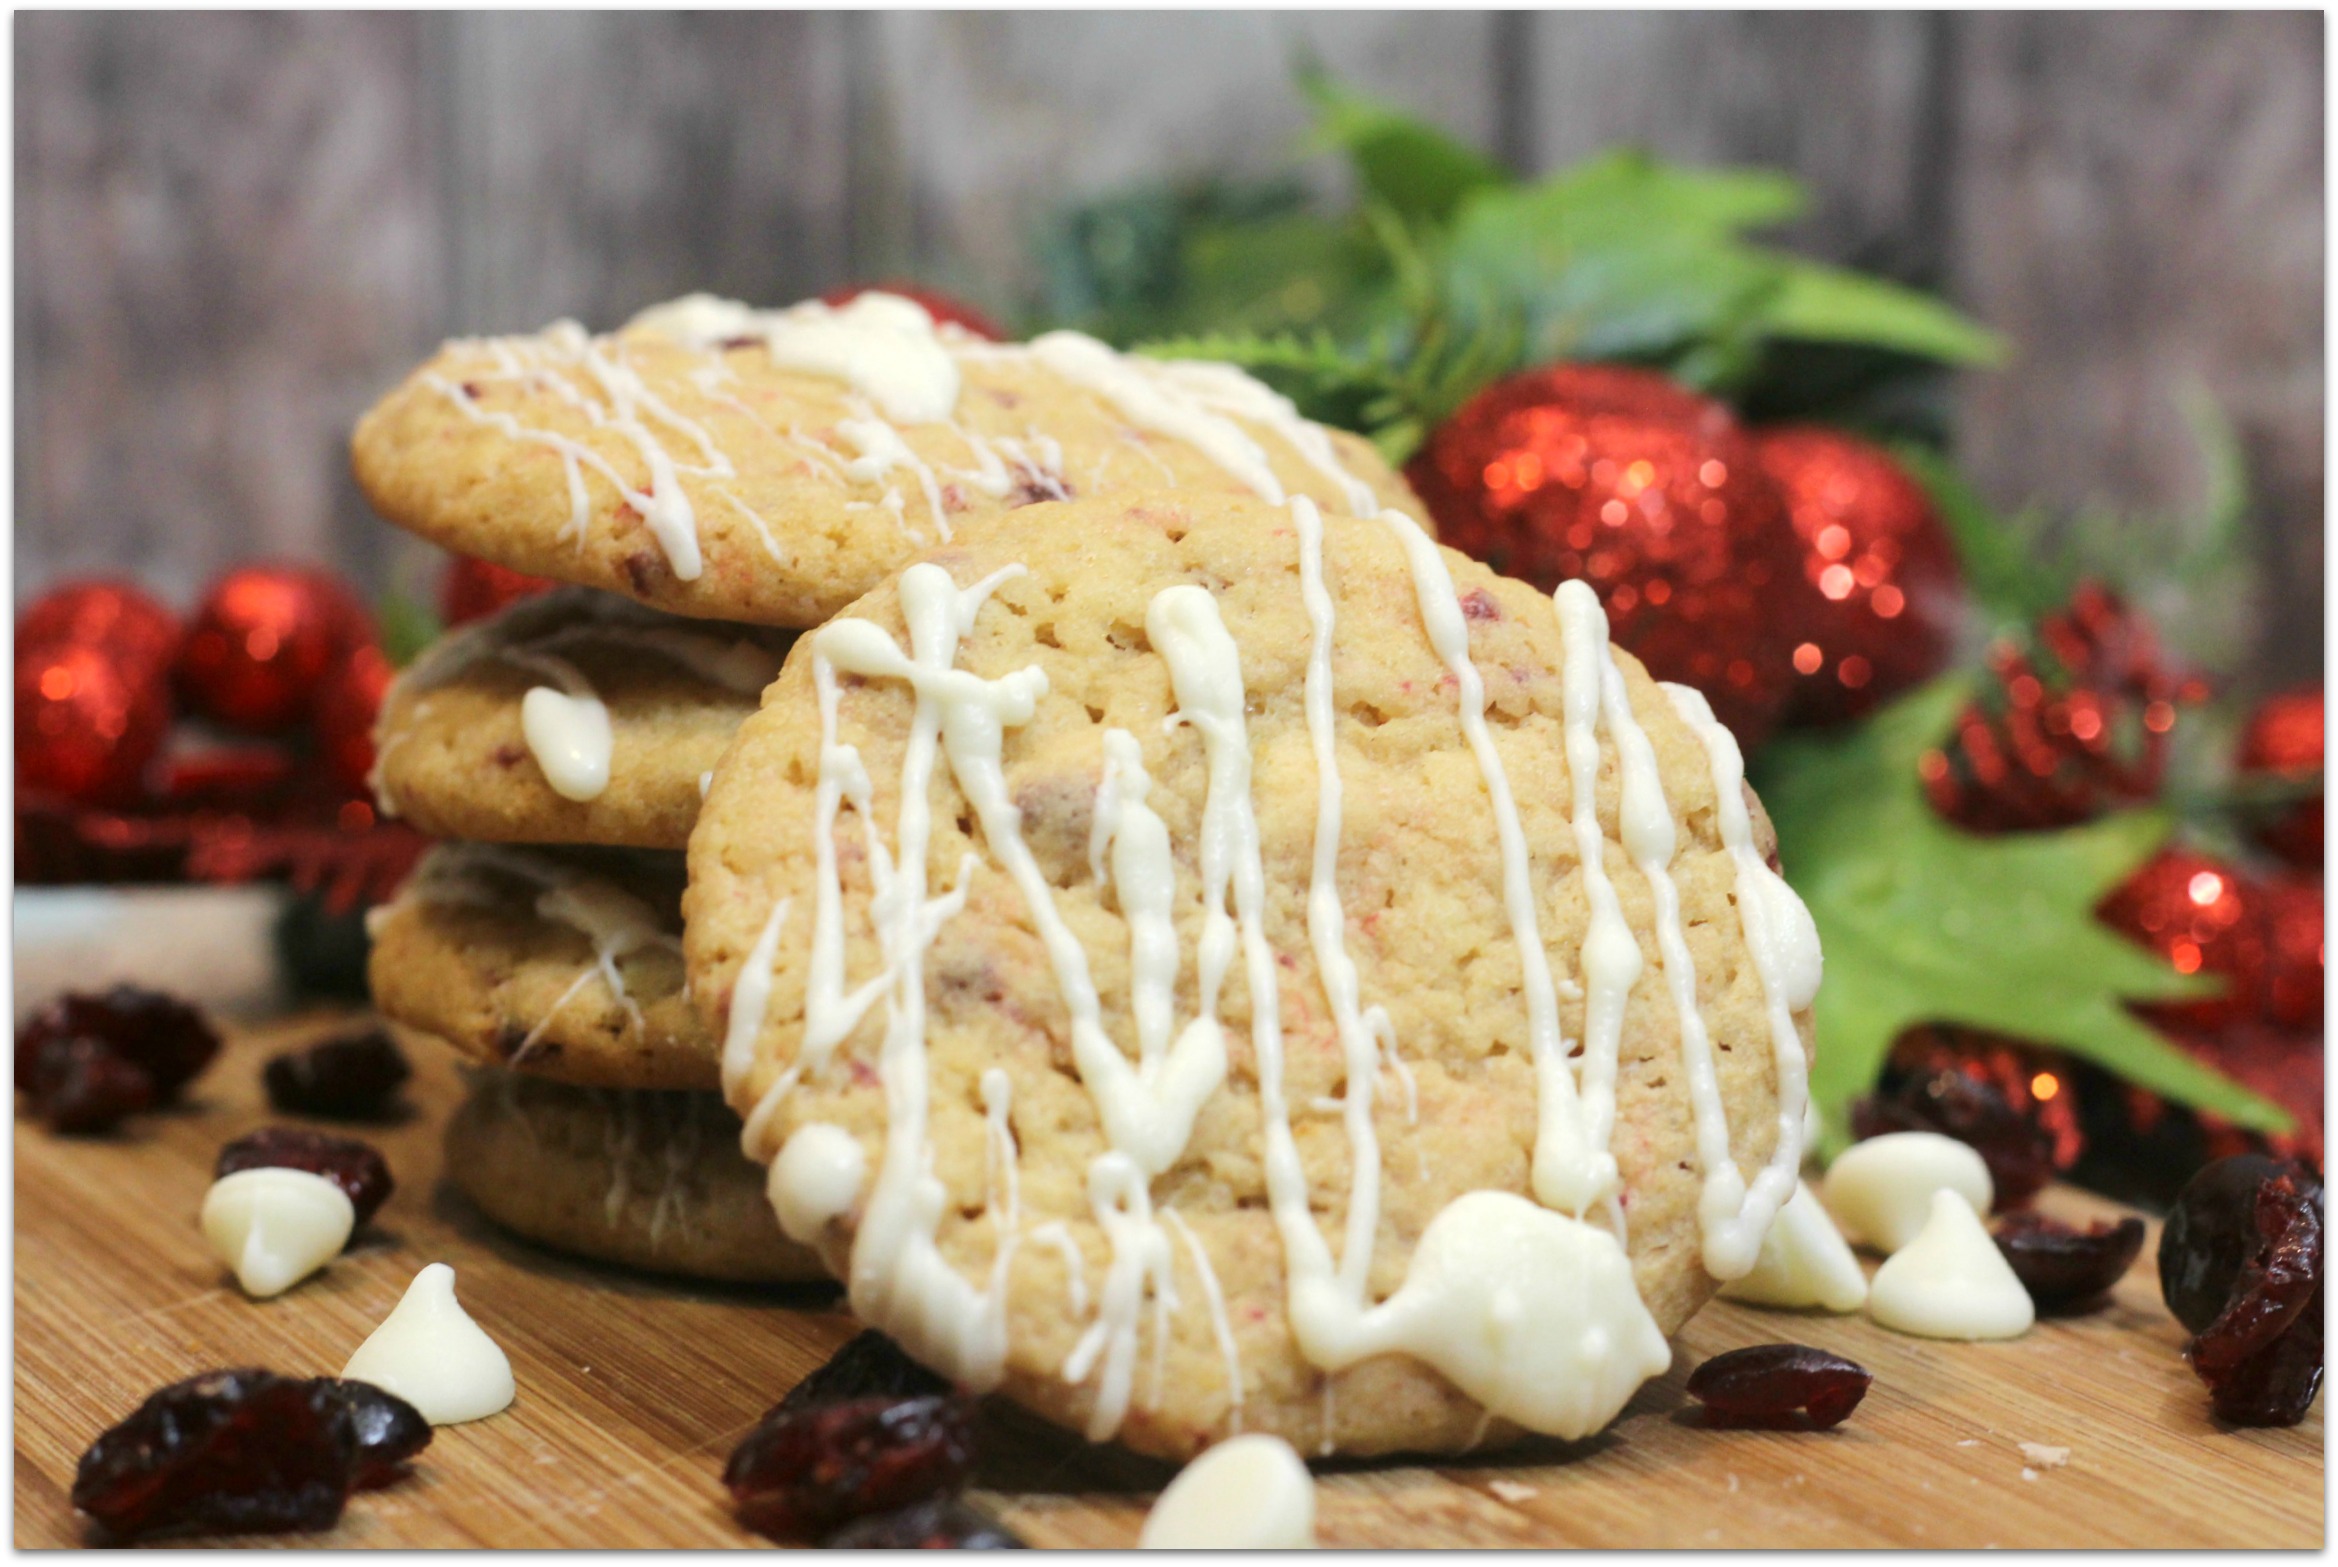 This recipe for Cranberry Cookies with White Chocolate Drizzle is such a great treat for Christmas because it’s a little bit different. Cranberries and white chocolate go so well together! I have dozens of recipes for Christmas desserts, but this is one of my favorites. When you are asked to bring food to a party, this will be a huge hit! It even makes a great gift idea! I love DIY gifts of desserts because they are personal and save me money!